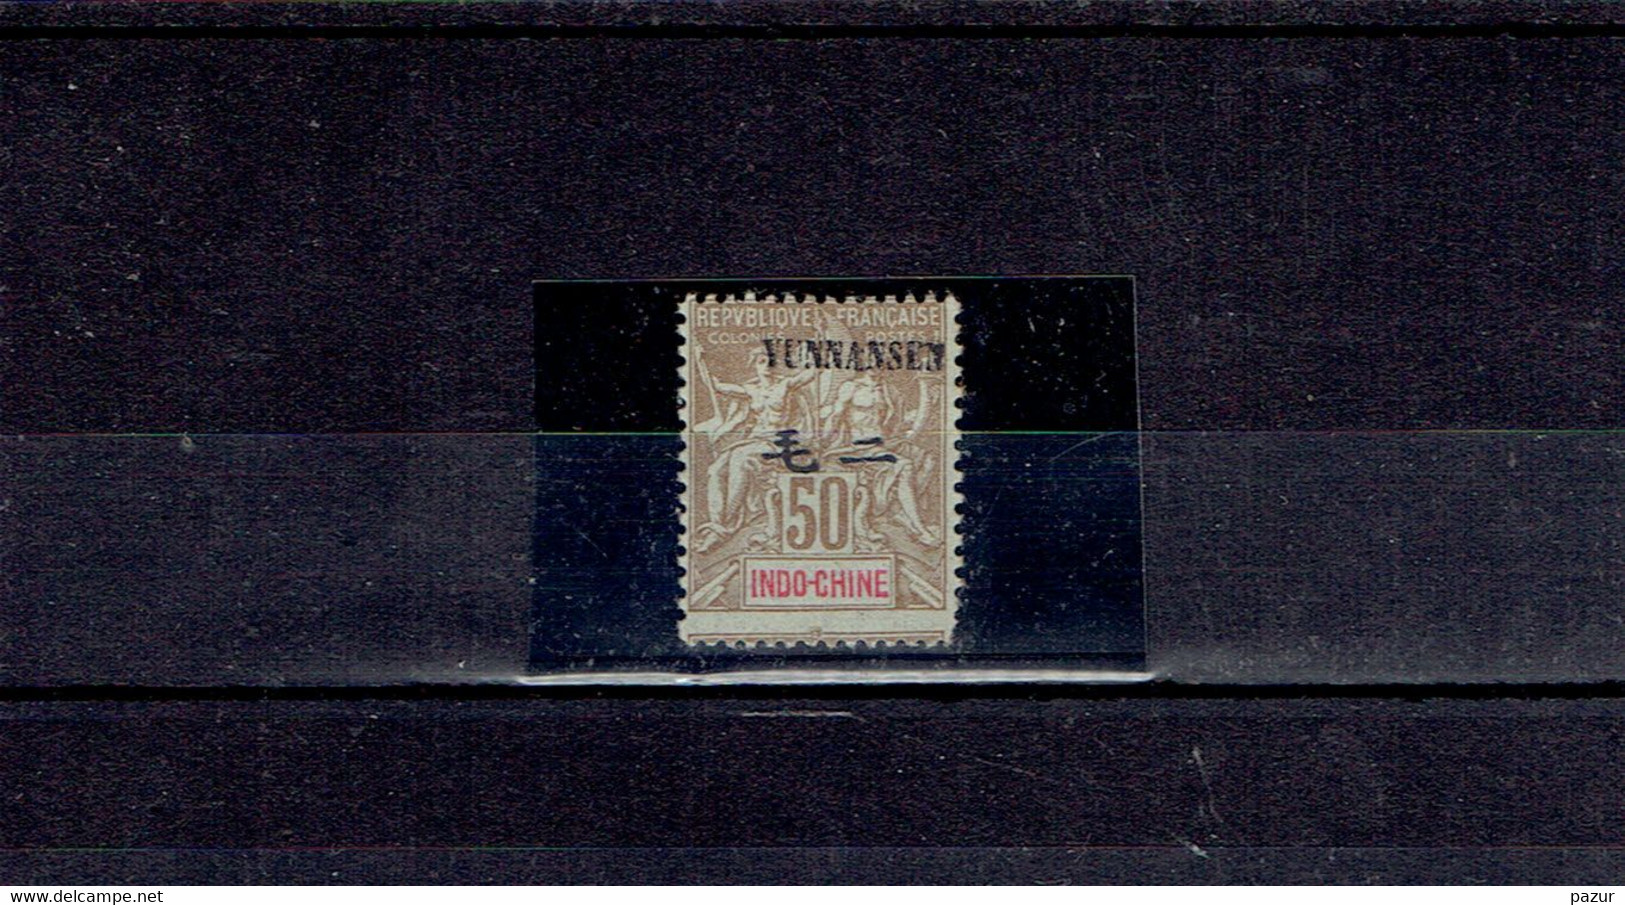 TP YUNNANFOU - BUREAU INDOCHINOIS - N°12 - X - SUPERBE - 1903 - Unused Stamps